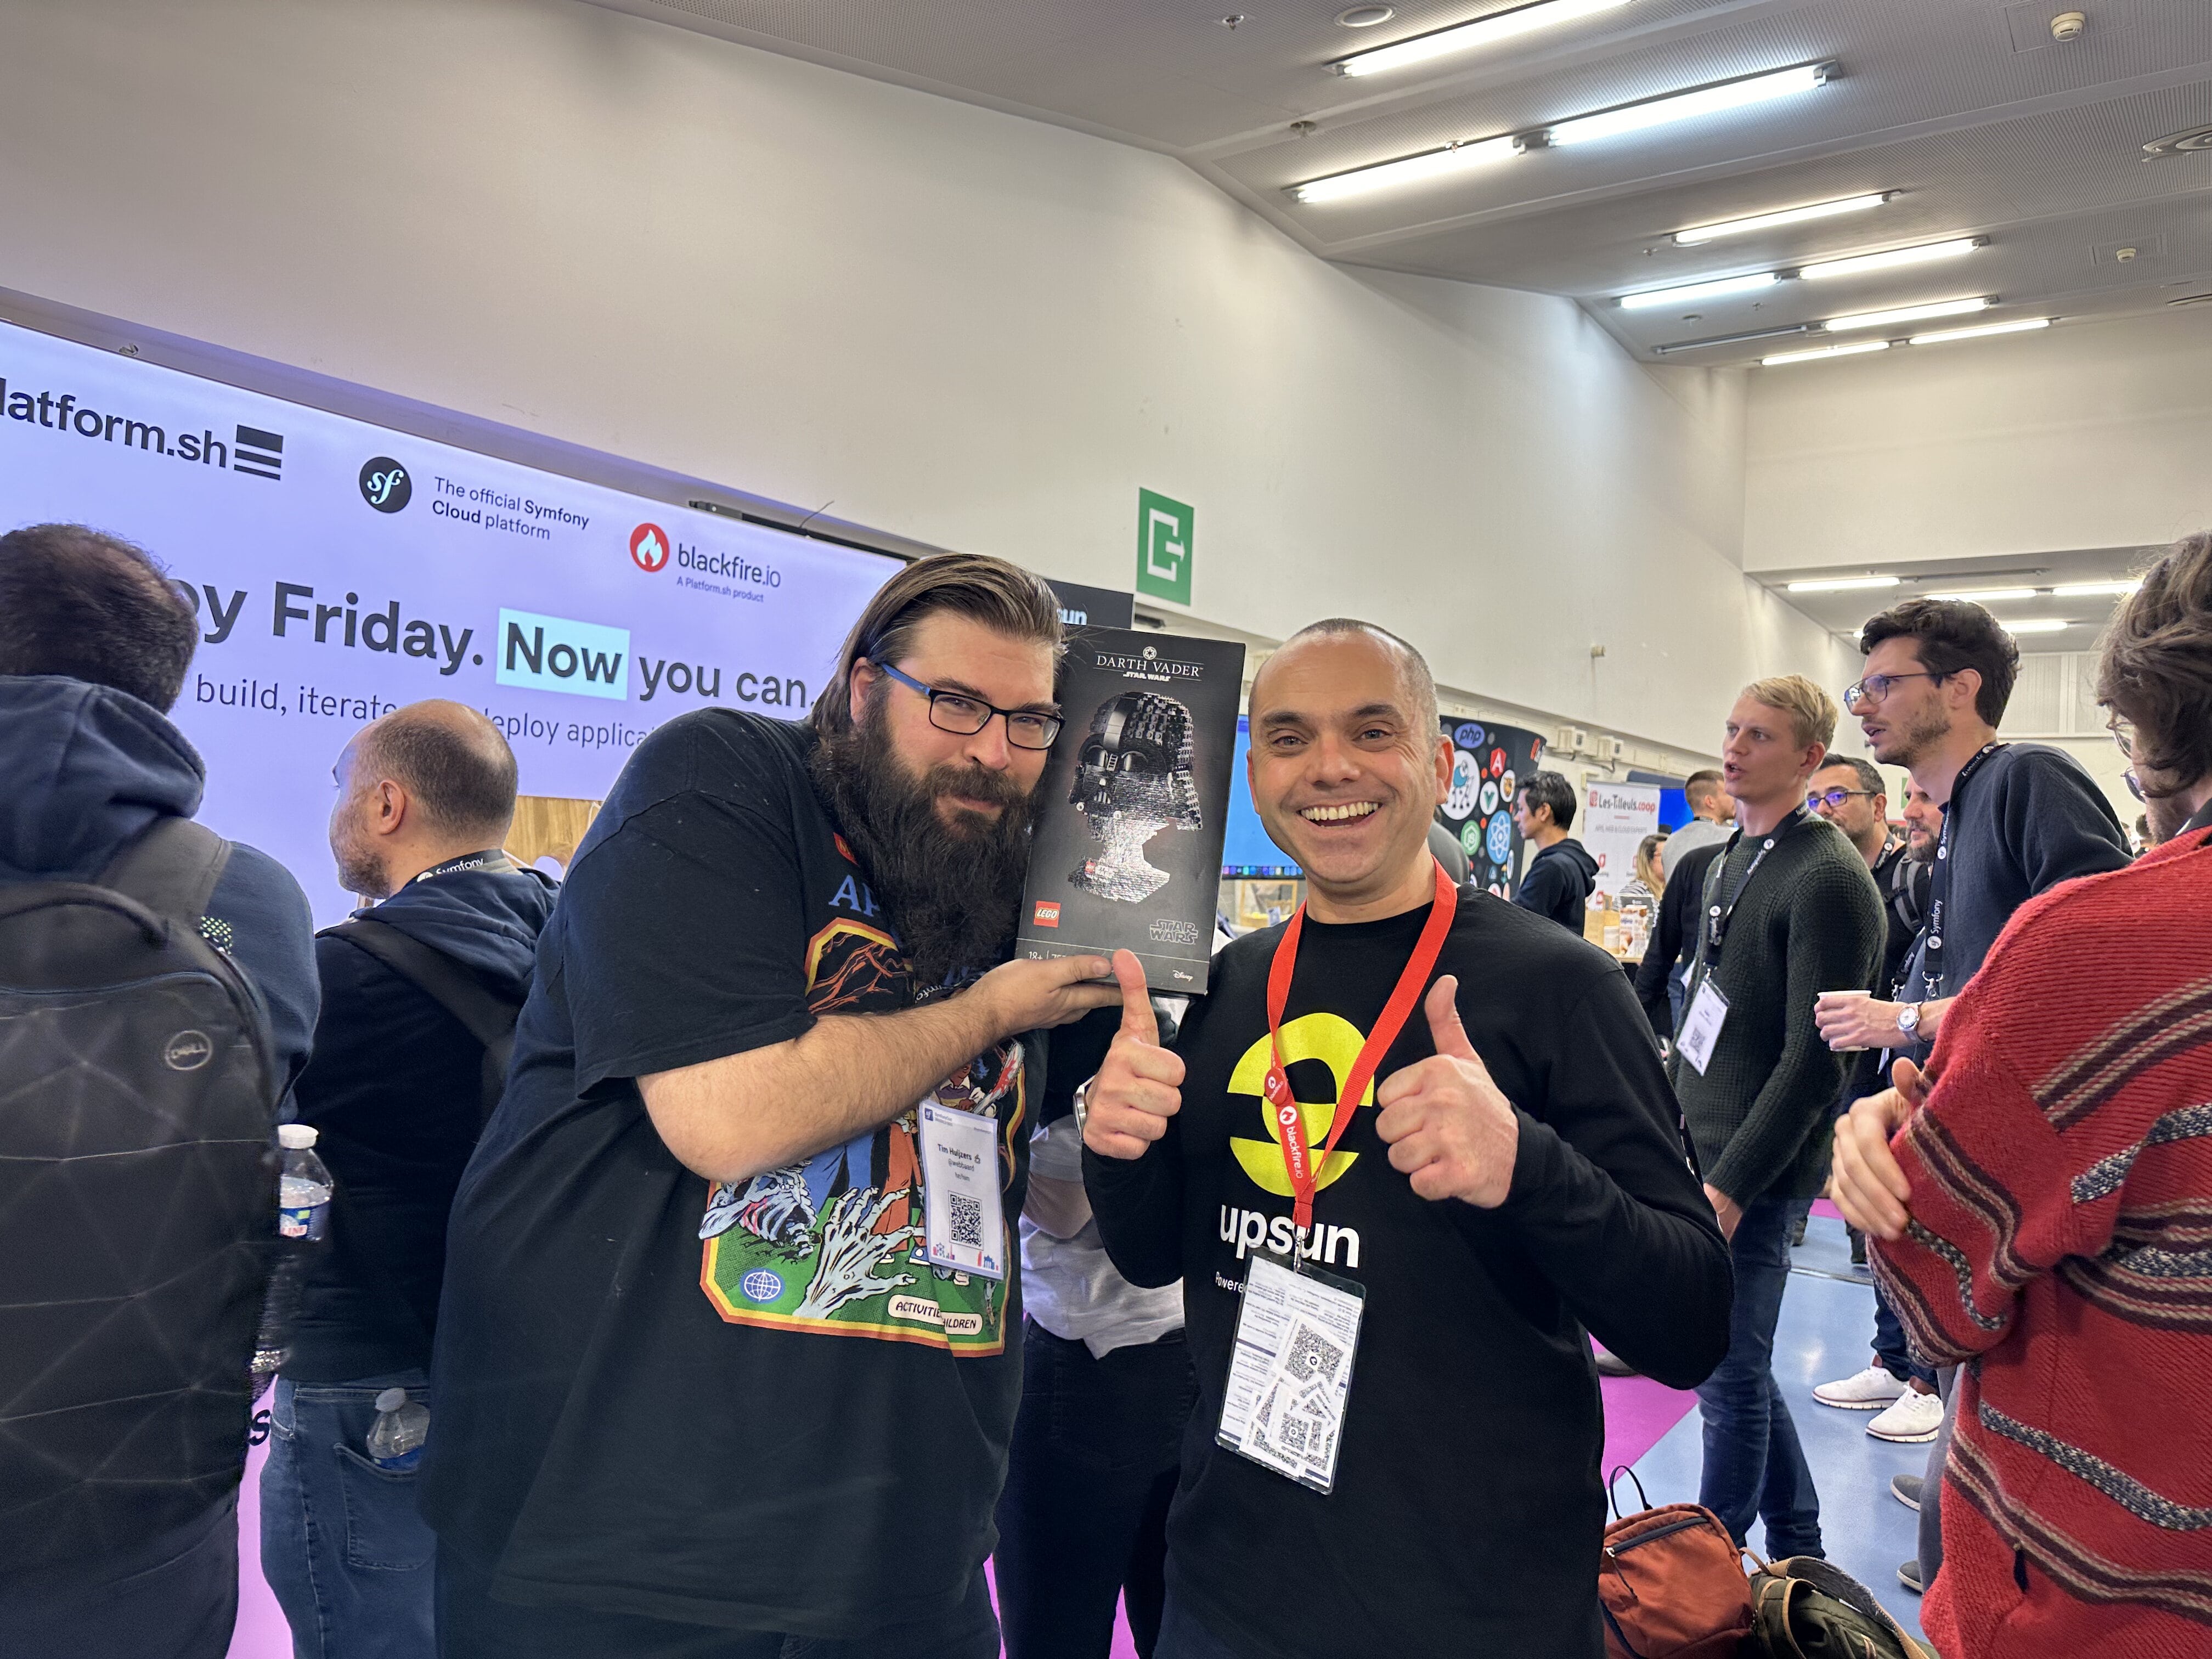 A photo of Tim Huijzers who won a Darth Vader LEGO set in the Platform.sh SymfonyCon booth game with Thomas di Luccio, DevRel Engineer at Platform.sh.